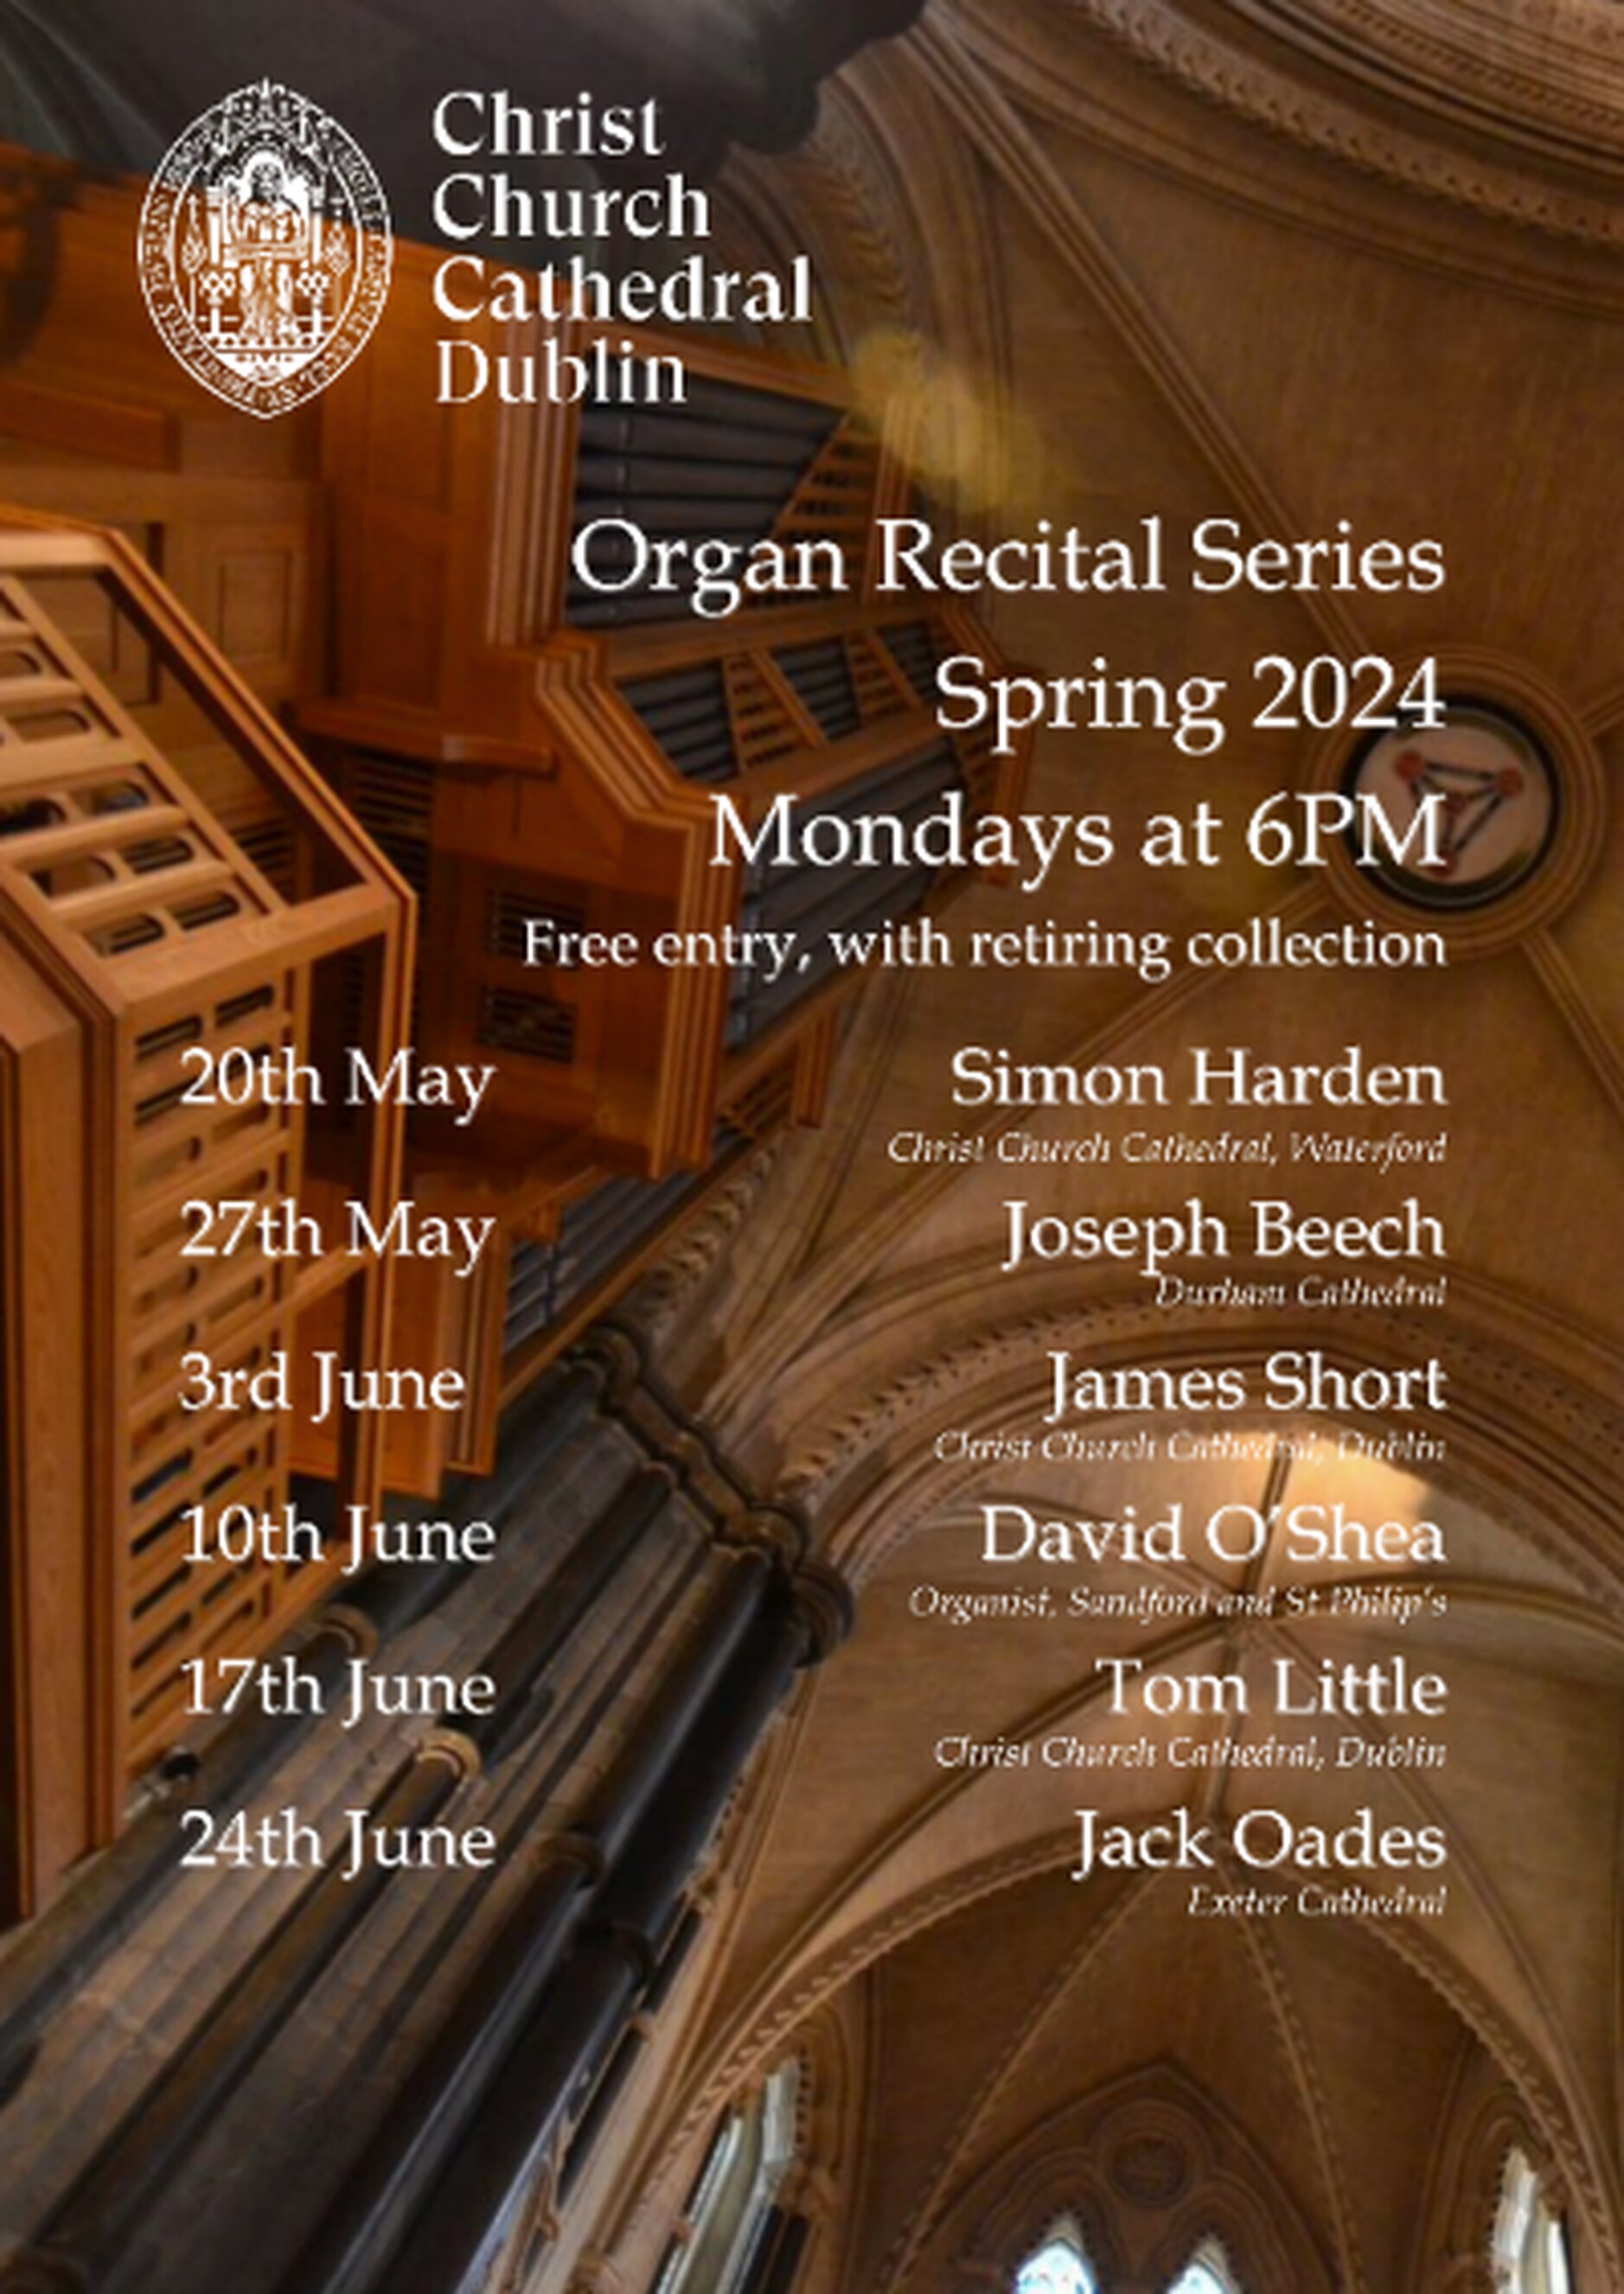 Spring Organ Recitals at Christ Church Cathedral - All are welcome to this series of organ recitals in Christ Church Cathedral, Dublin, each Monday at 6pm until June 24. The 45–minute recitals will continue each Monday evening featuring both local and international organists offering a feast of music. The cathedral community especially looks forward to welcoming back former Assistant Director of Music, Jack Oades, to close the series. Recitals are free to attend and not to be missed! 